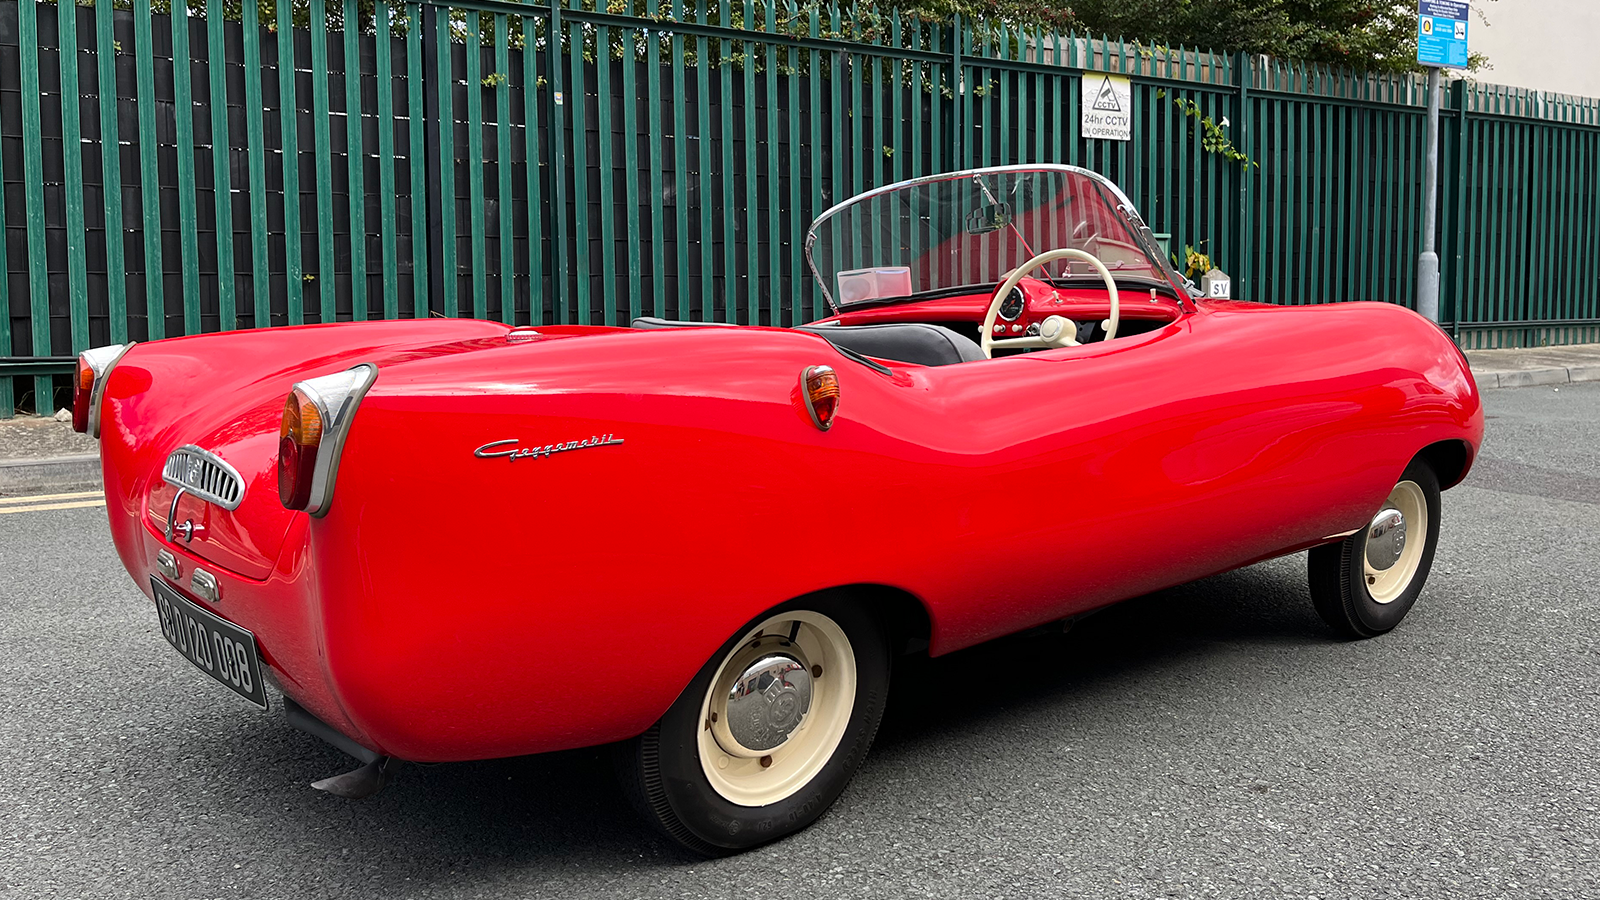 These 8 bonkers bubble cars are for sale